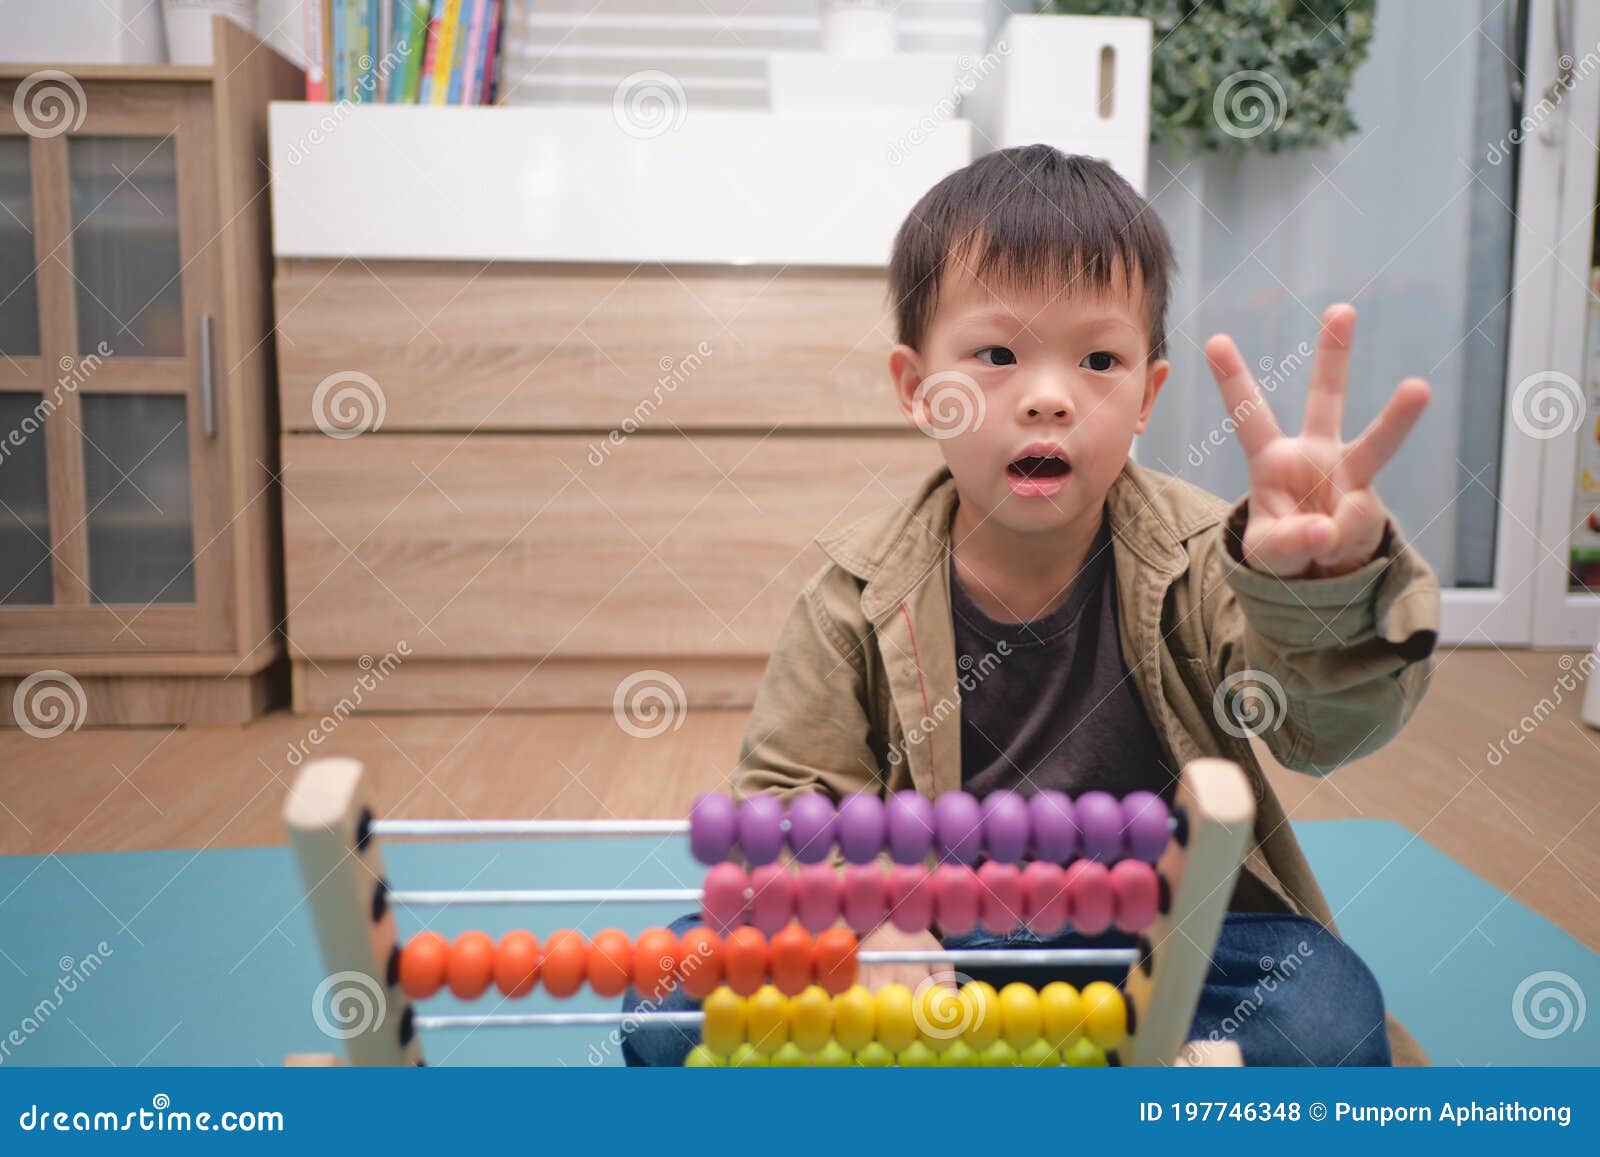 How to use abacus Abacus Division